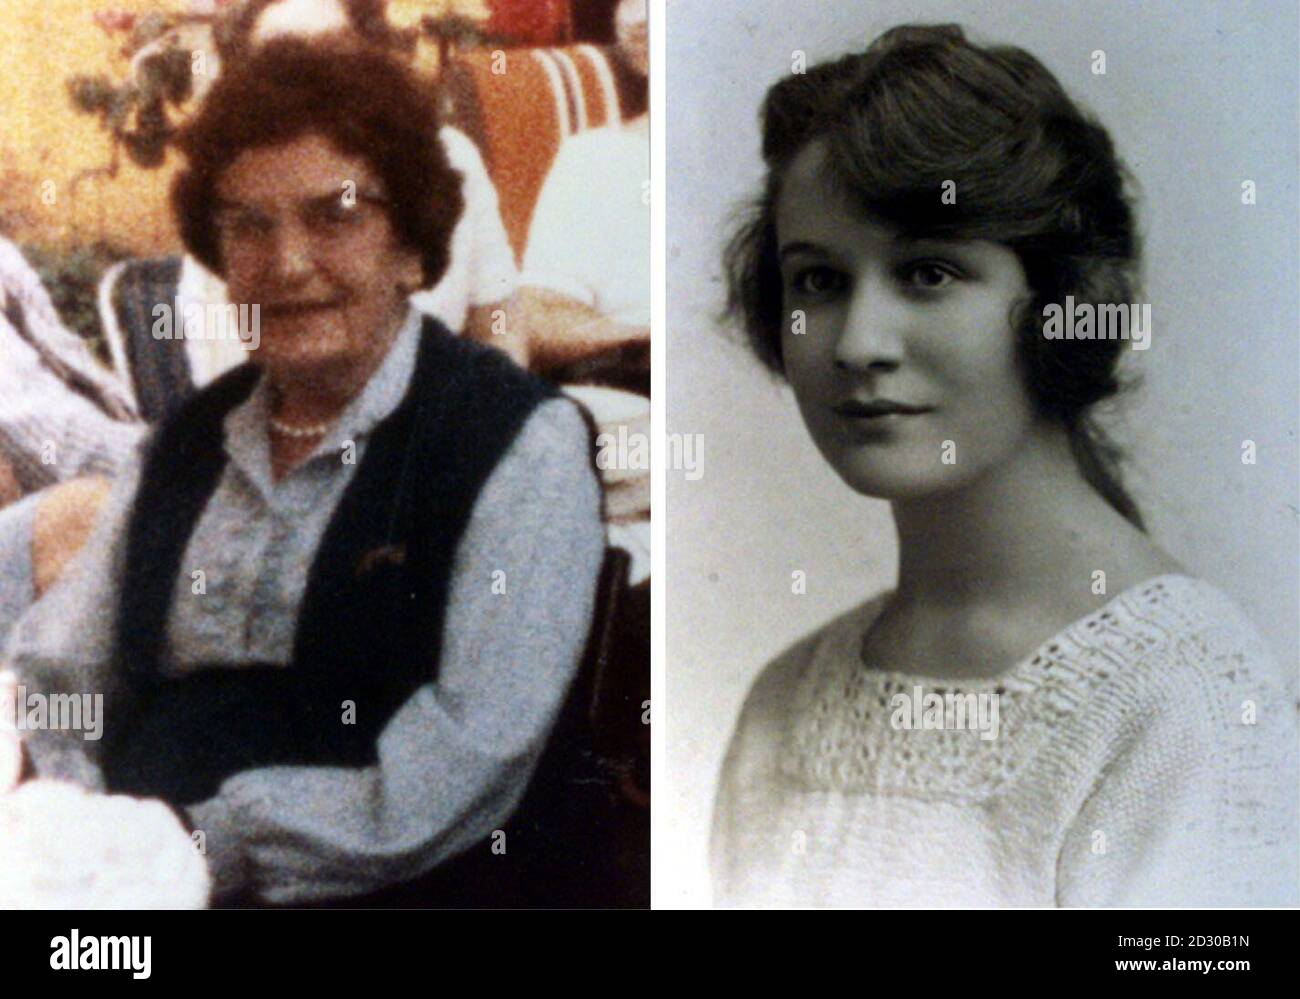 Family photos of Annie Kay in her later years (L) and as a young woman. Unemployed lorry driver David Spillman, 45, from Essex, was convicted over a plot to defraud the beneficiaries of the elderly spinster's 1.8M will. A jury at Basildon Court found him guilty. * by a majority of 10 to wo. The scam had involved Spillman s mother-in-law Annette Russill posing in a wig as the wheelchair-bound 87-year-old Annie Kay. Russill also forged Miss Kay s signature on a bogus will during a meeting with Miss Kay s solicitor. Russill, 65, of Rochford in Essex, and her daughter, Spillman s estranged wife, Stock Photo